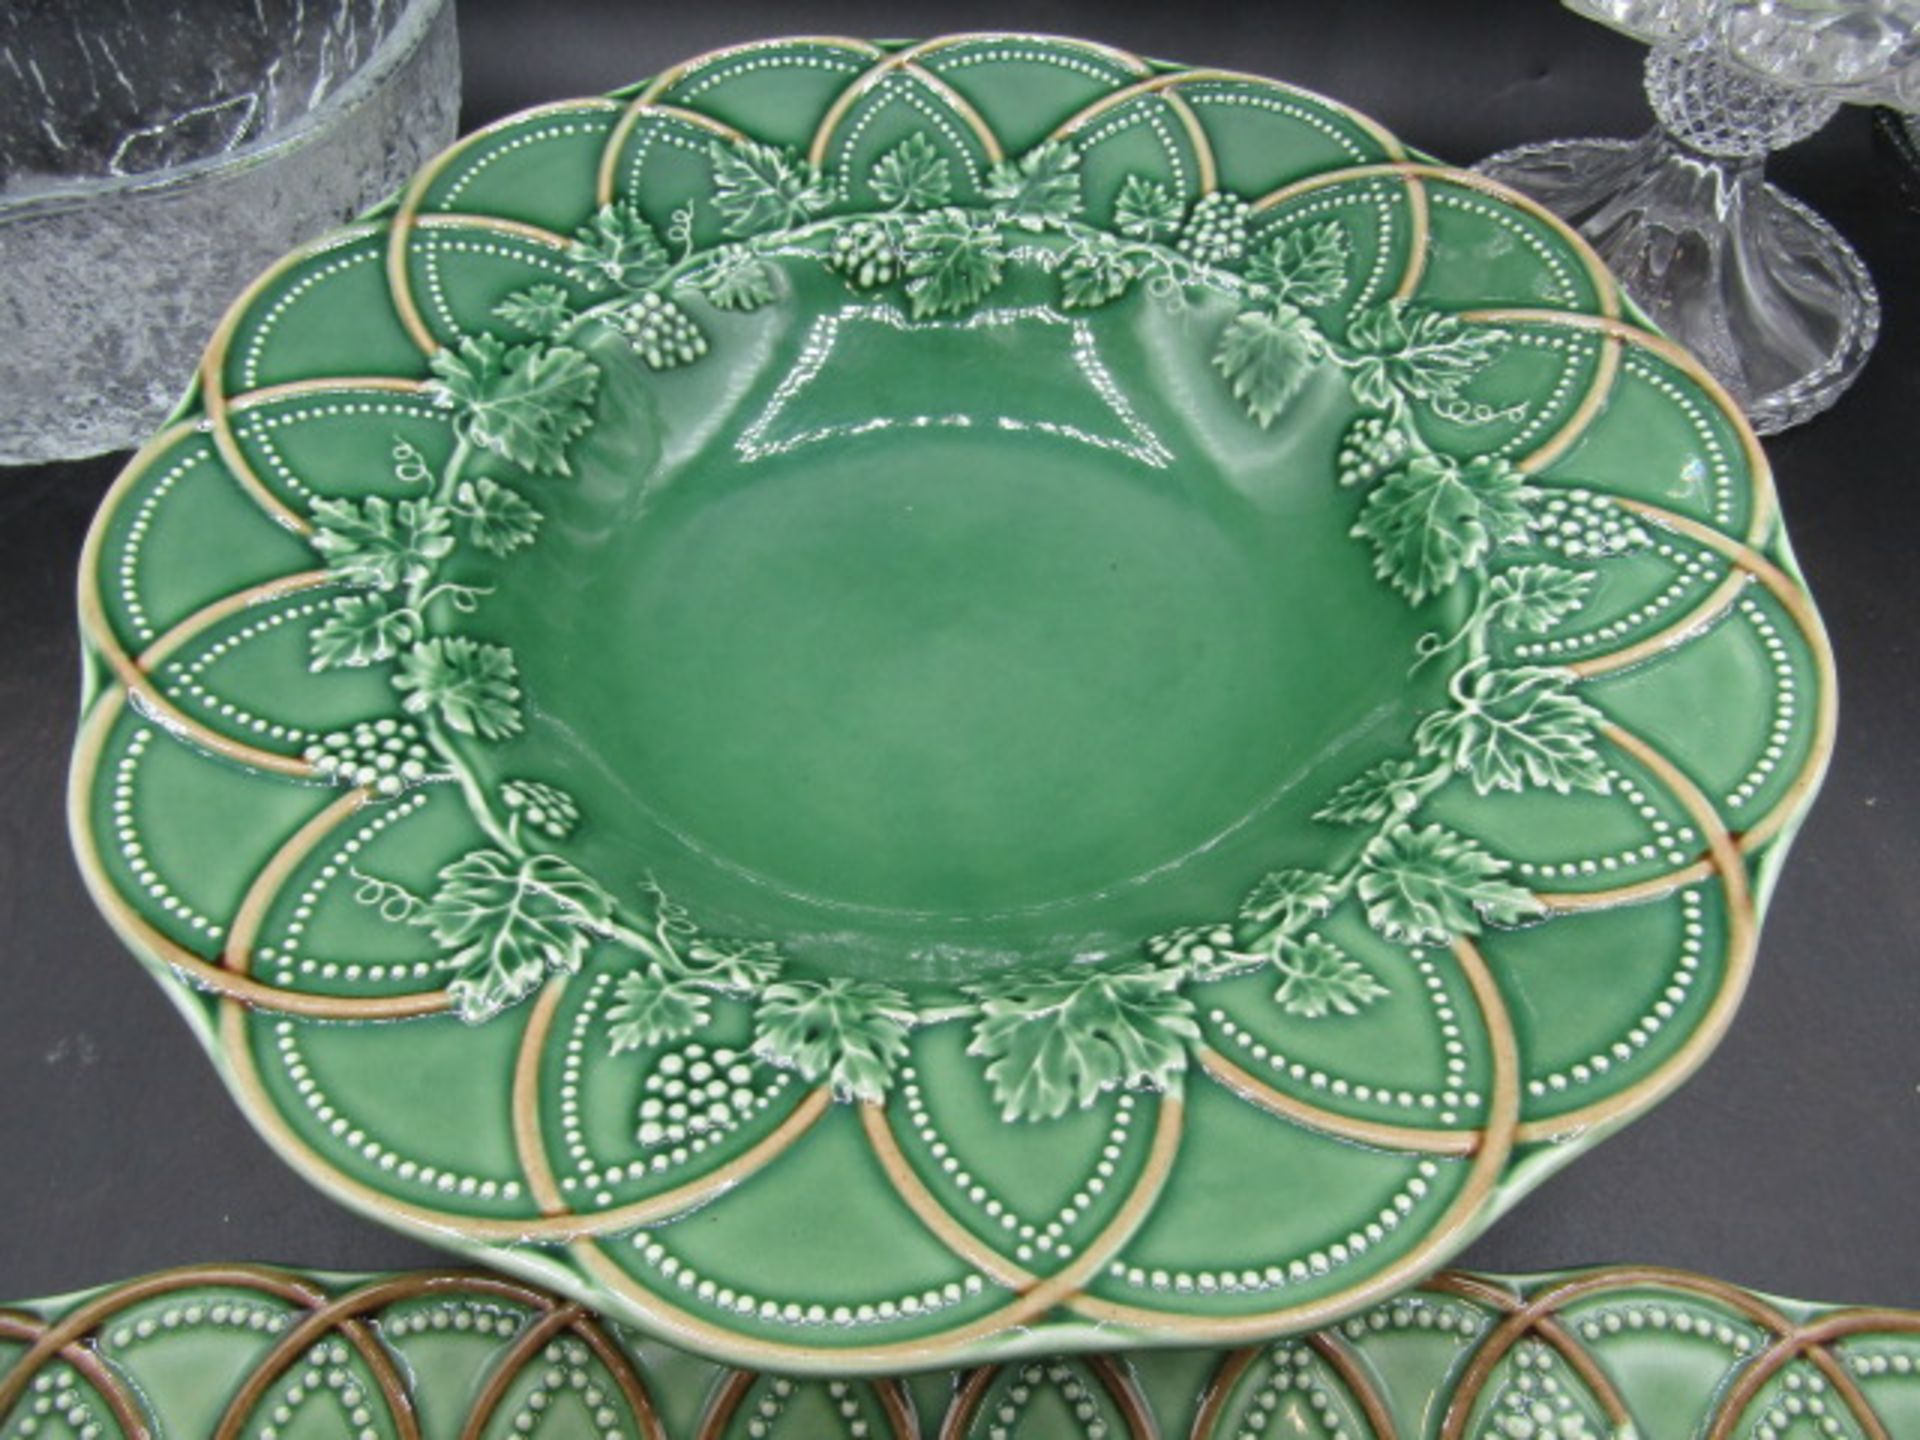 Portuguese pheasant platter and bowl decorated with vines along with 2 glass dishes - Image 2 of 5